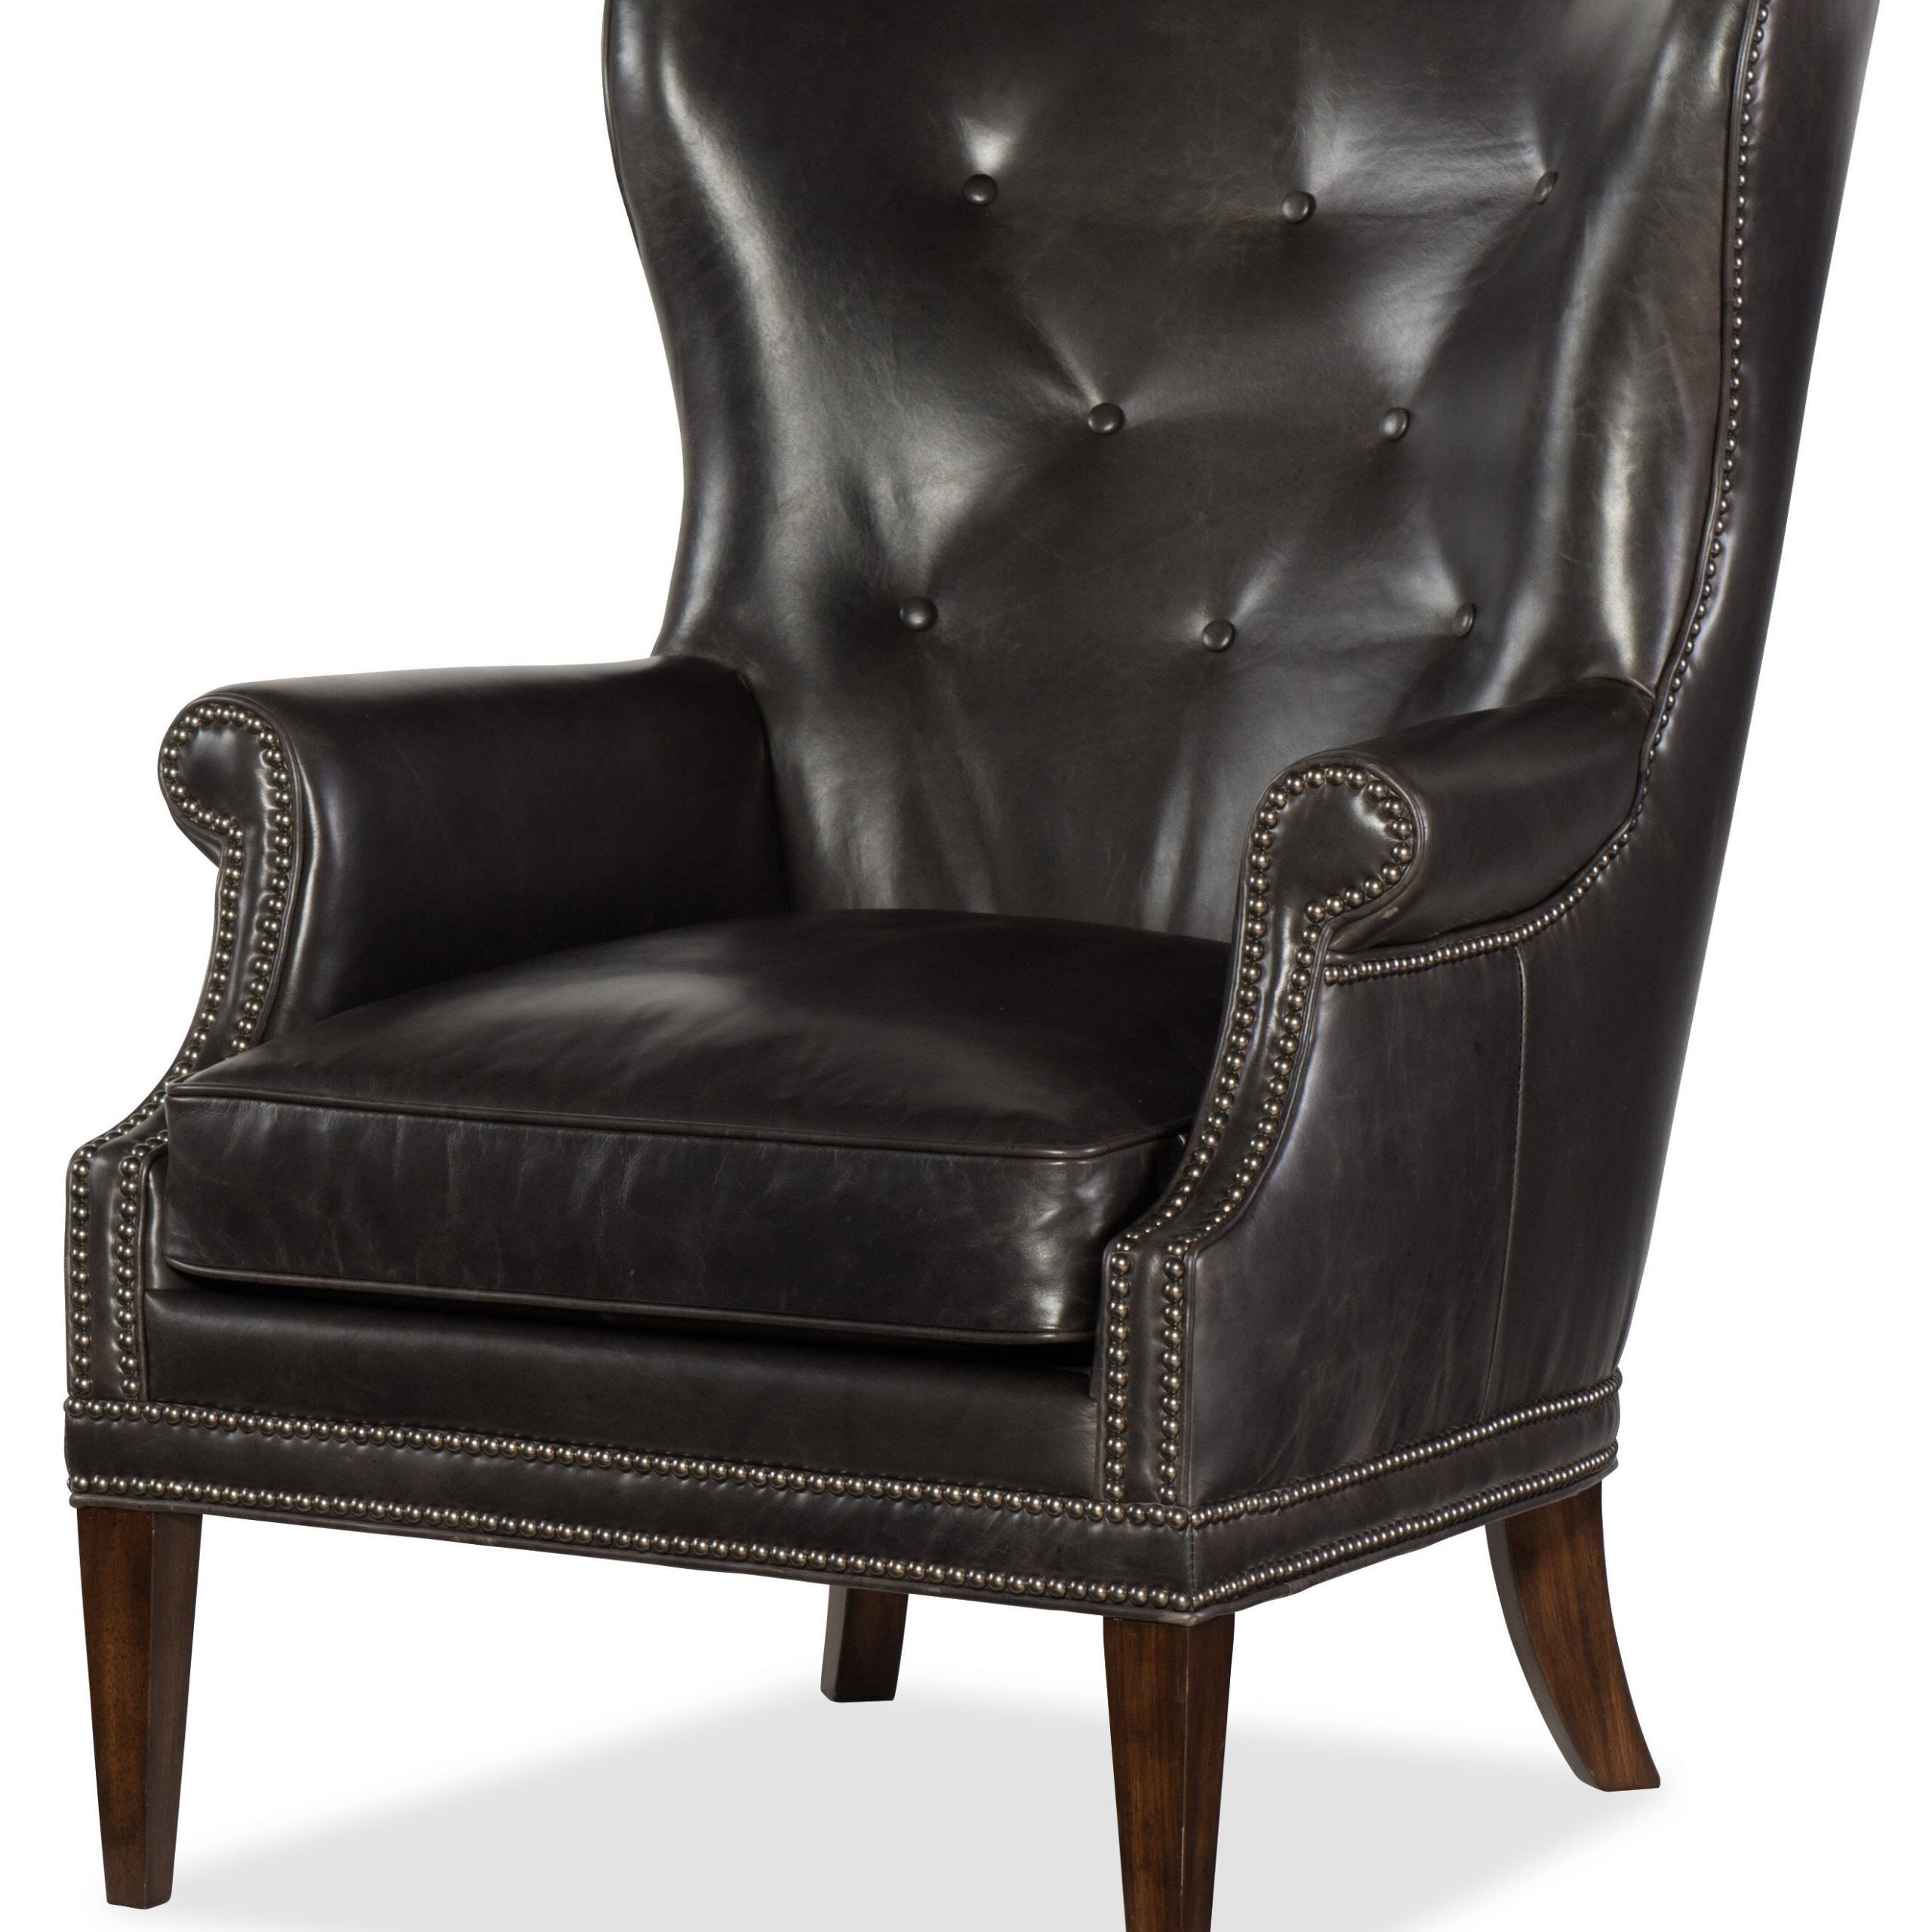 Barnard Polyester Barrel Chairs For Most Recent Hooker Furniture Padro Wingback Chair (View 14 of 20)